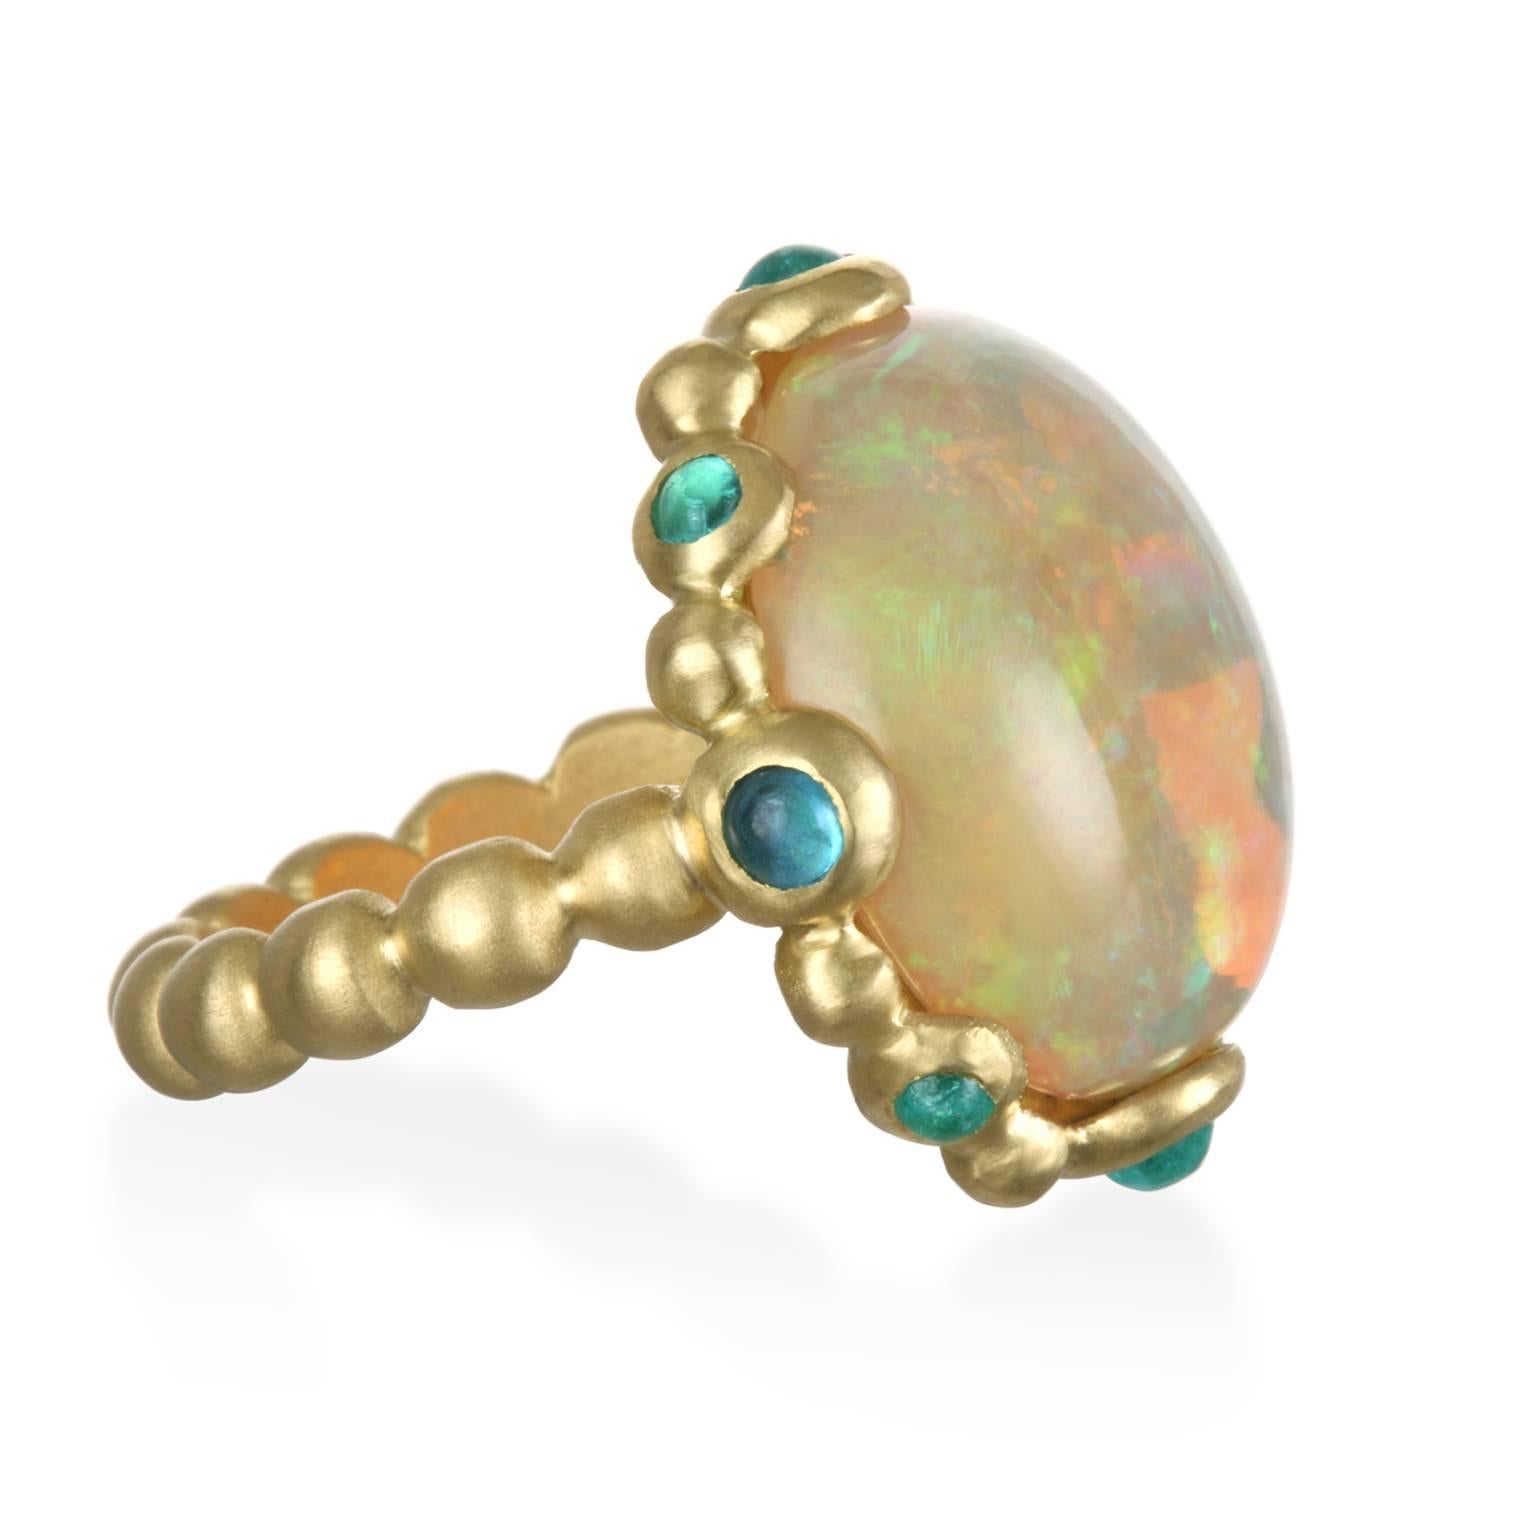 Faye Kim's 18k gold* Ethiopian Opal ring is handcrafted in 18k gold.  
Vivid blue-green Paraiba Tourmaline cabochons enhance the play-of-color displayed in this 9.02 carat opal.  Diameter is 5/8